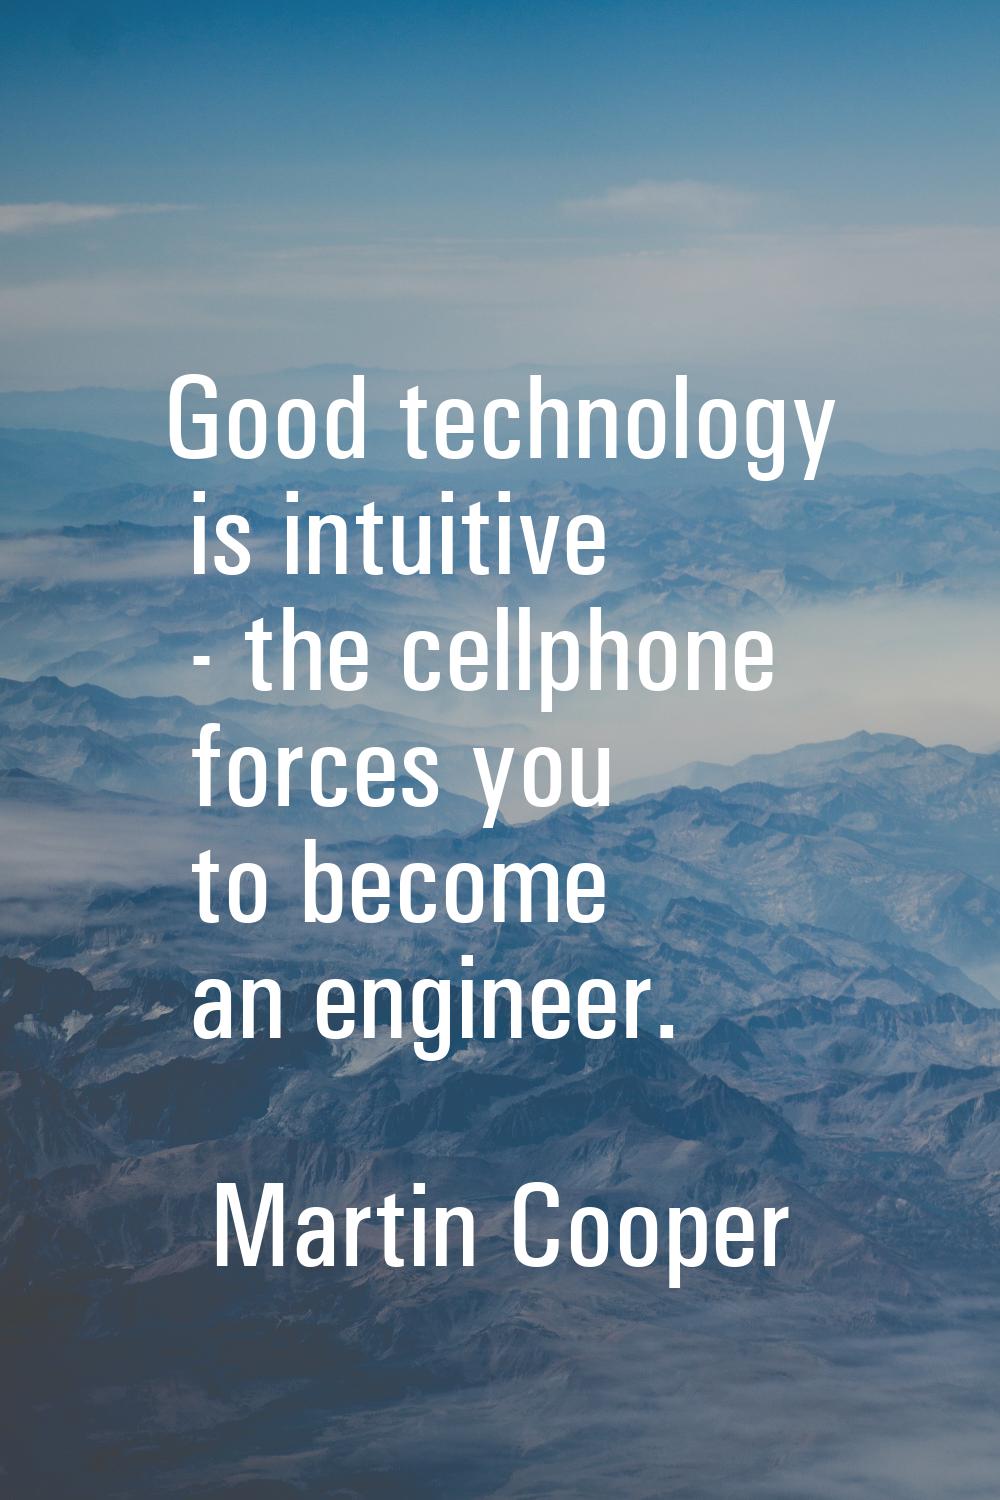 Good technology is intuitive - the cellphone forces you to become an engineer.